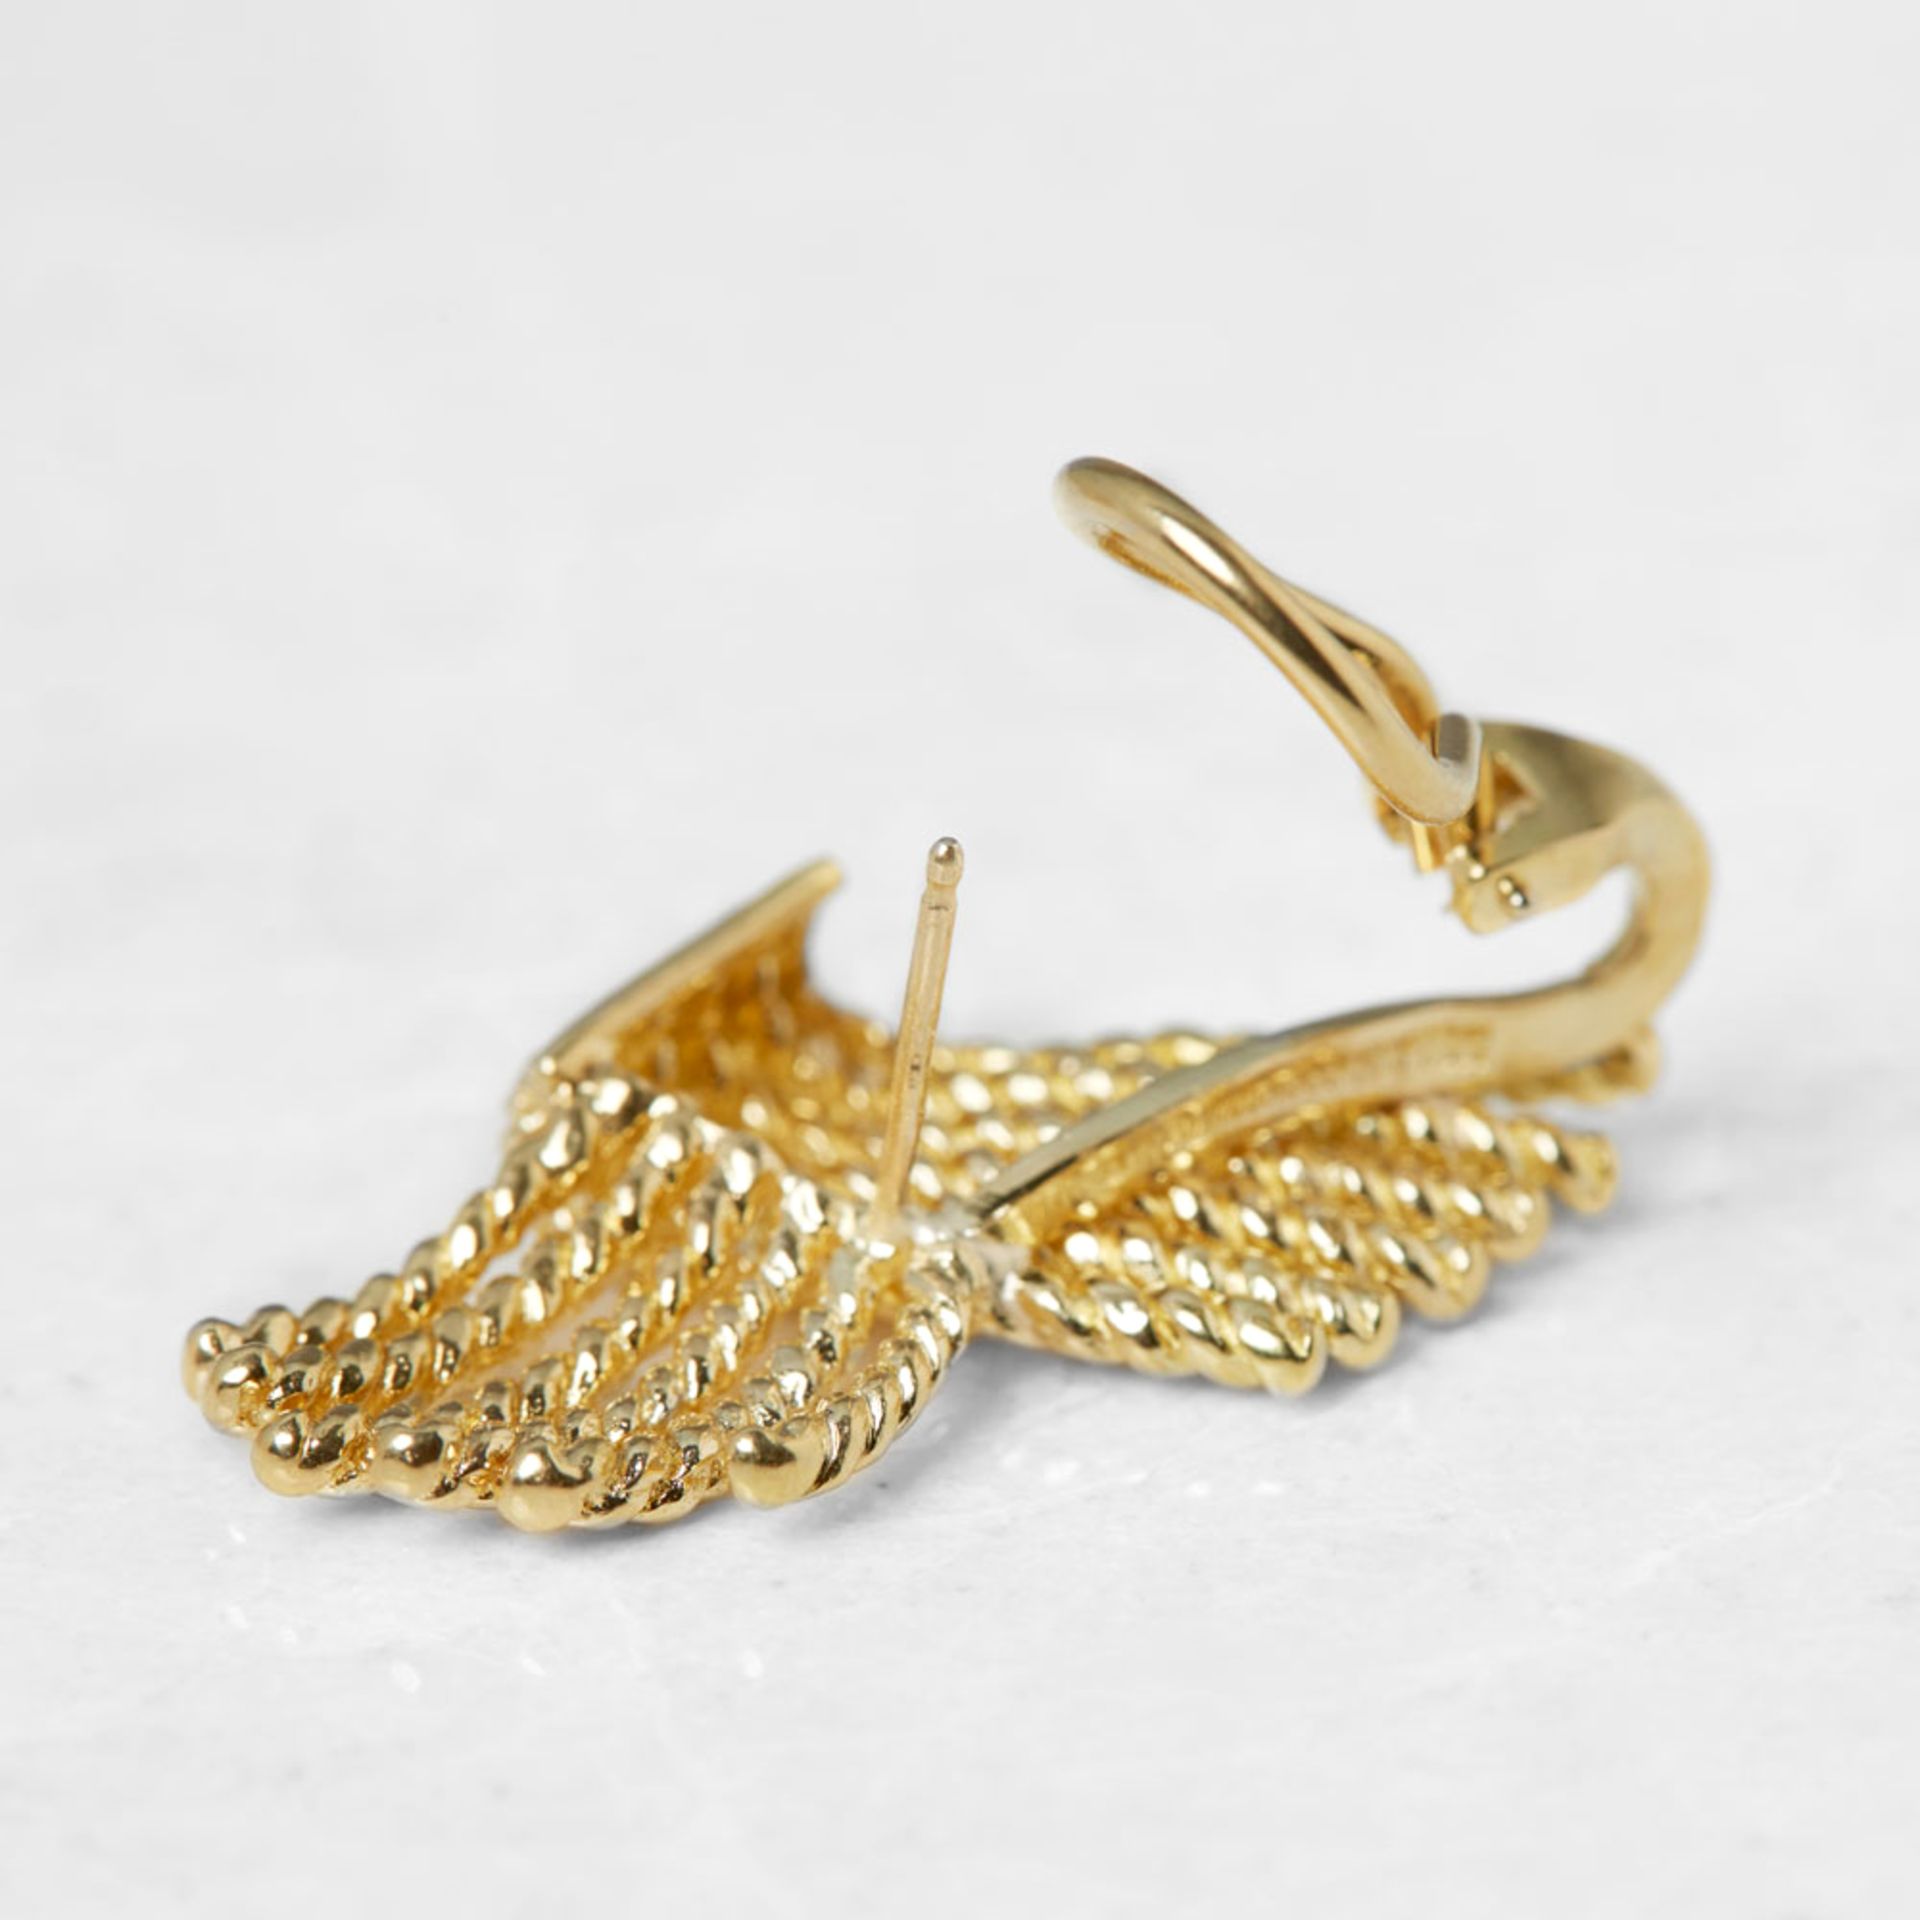 Tiffany & Co. 18k Yellow Gold Rope Design Schlumberger Earrings - Image 3 of 5